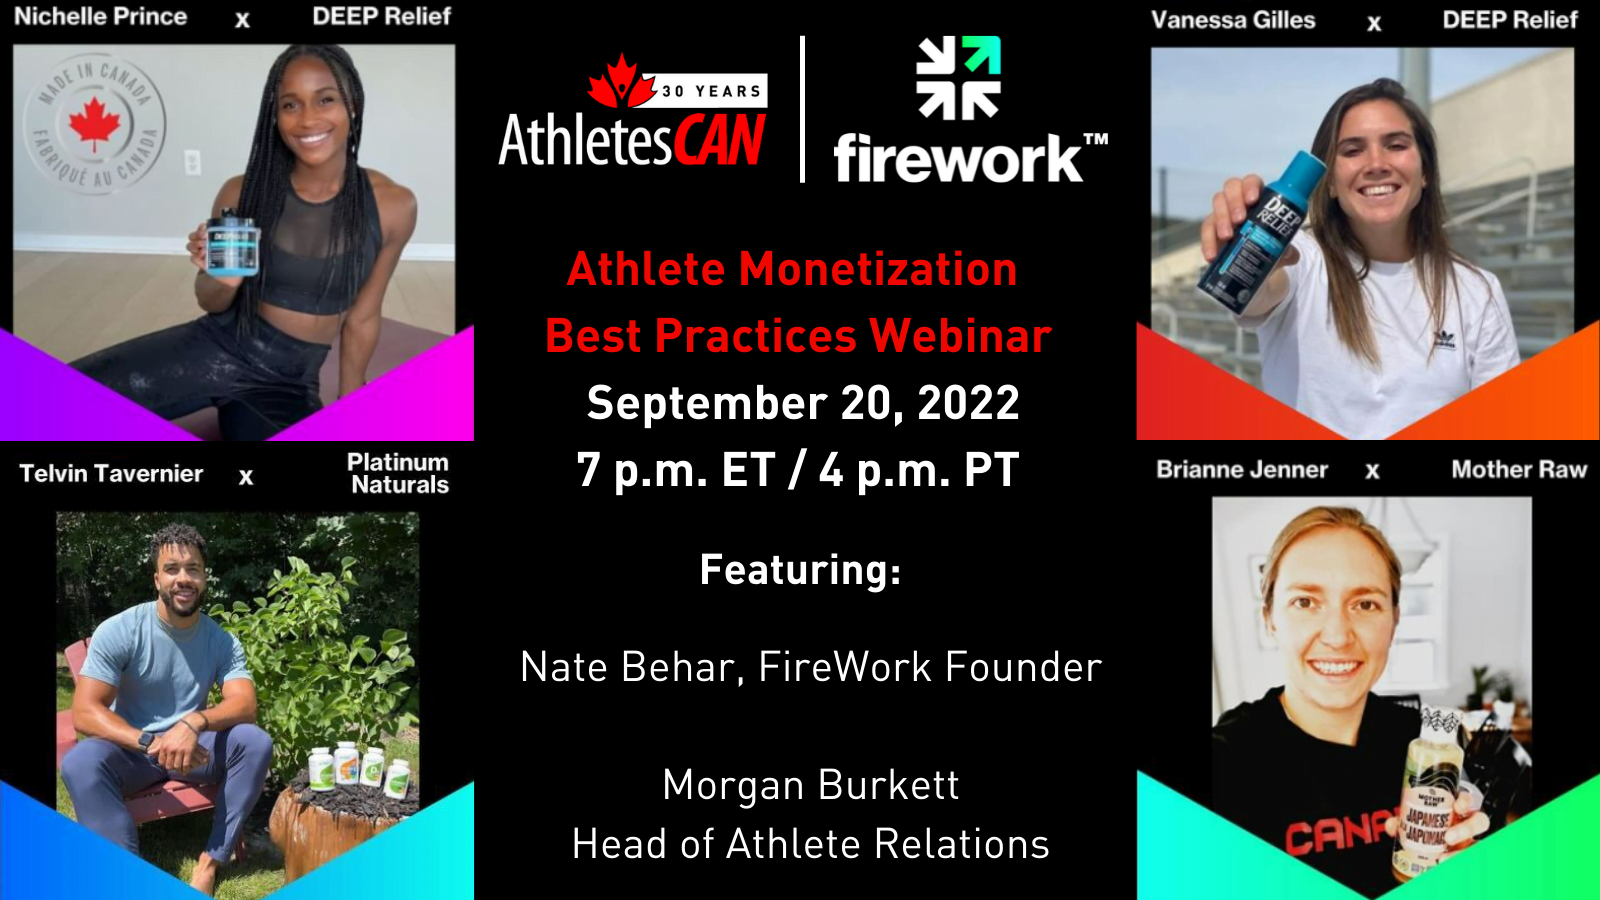 AthletesCAN and FireWork to host Athlete Monetization Best Practices webinar for members Sept. 20